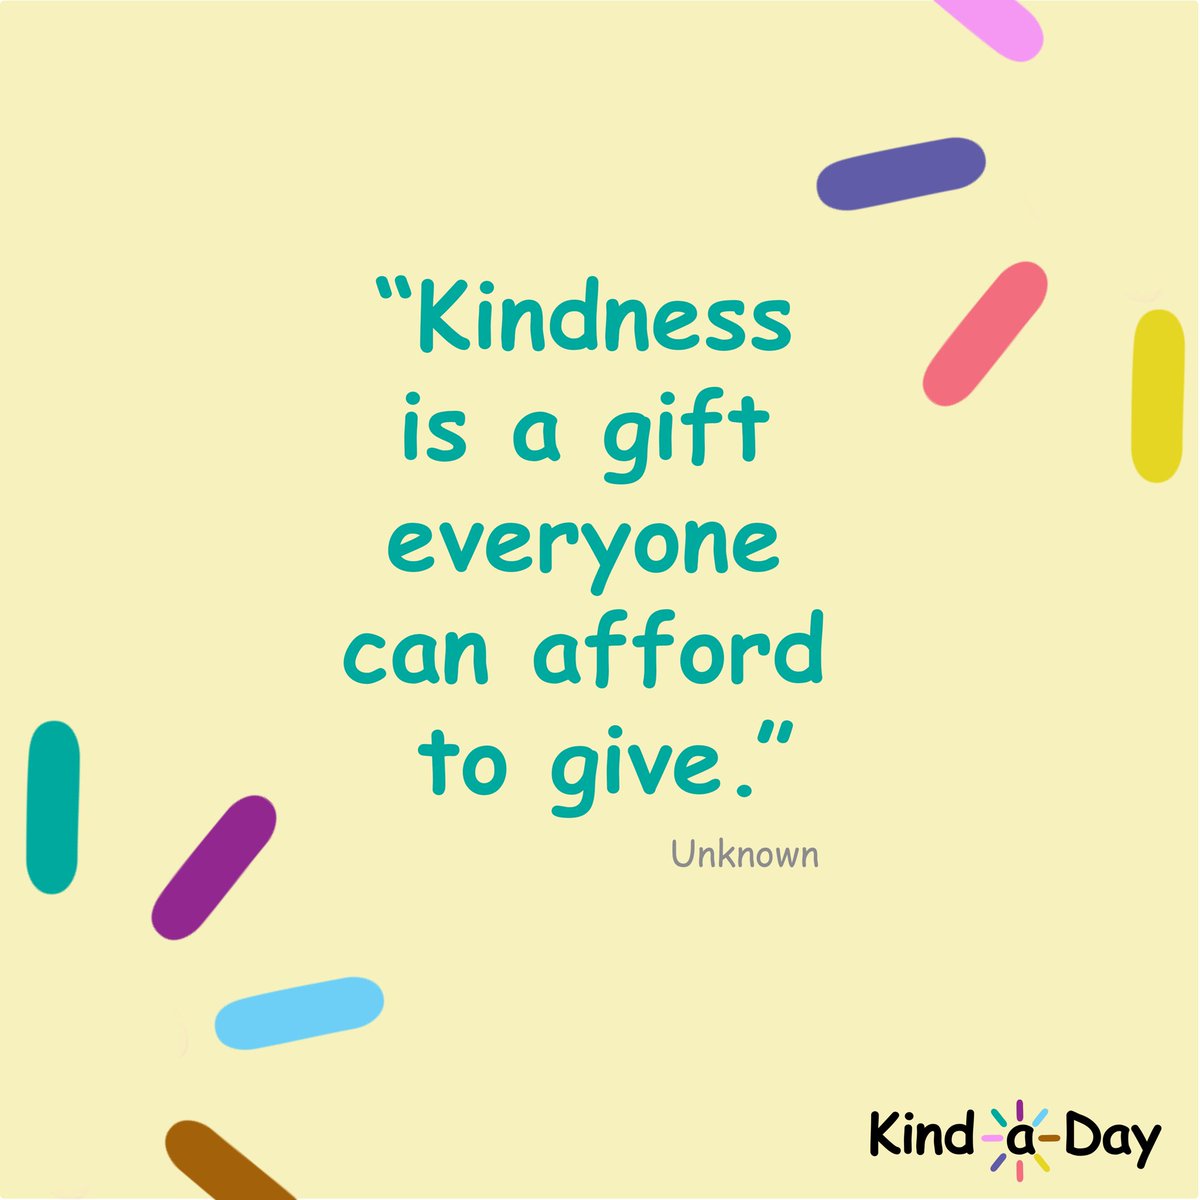 “Kindness is a gift everyone can afford to give” Unknown 🎁 
 
#Gift #Give #giving #GiftIdeas #kind #BeKind #kindness #KindLife #ActsOfKindness #SpreadKindness #KindnessMatters #ChooseKindness #KindnessWins #KindaDay #KindnessAlways #KindnessEveryday #Kindness365